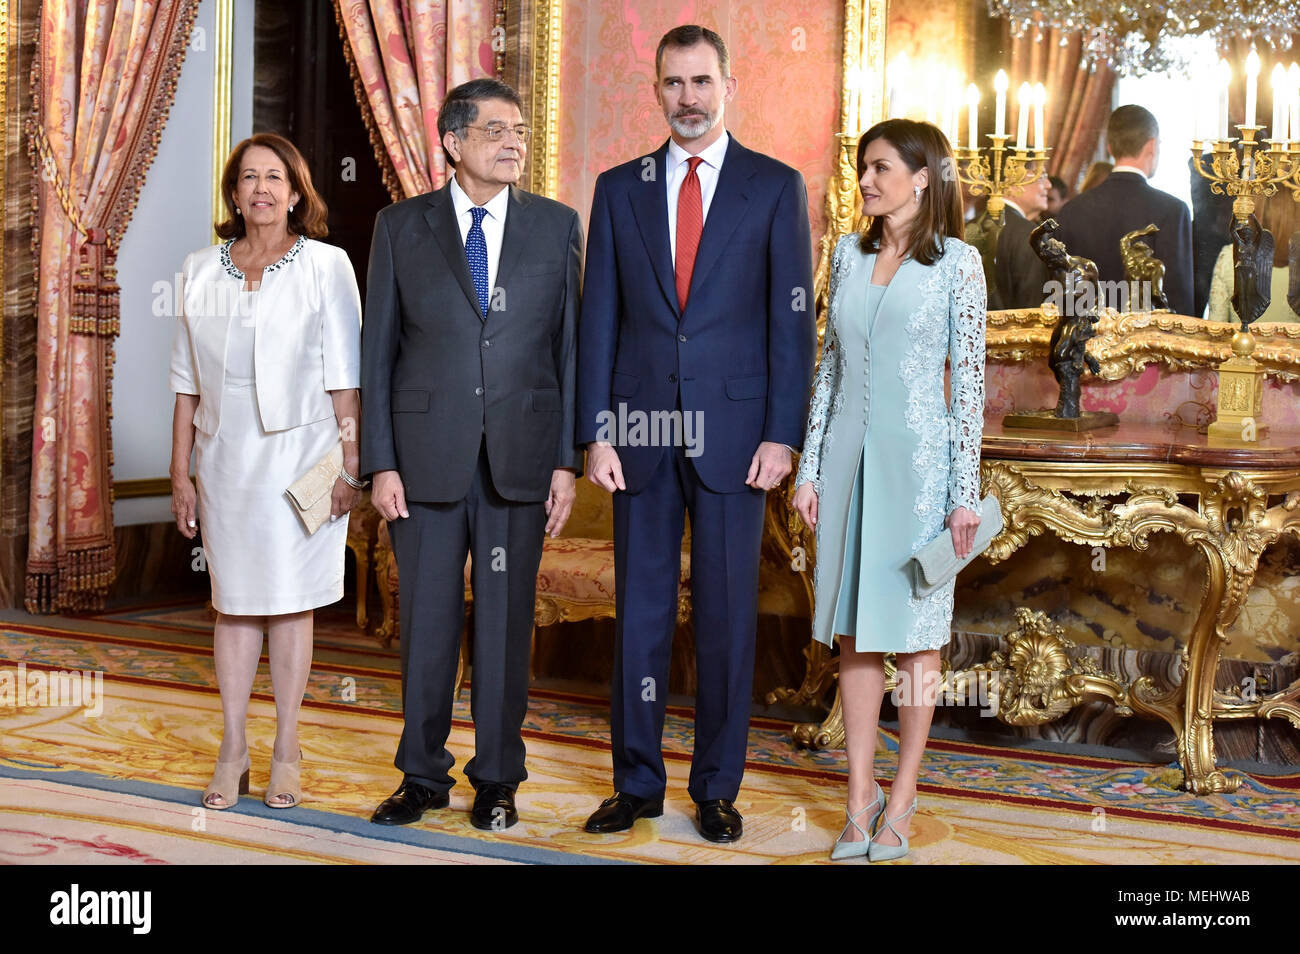 Sergio Ramirez with wife Gertrudis Guerrero Mayorga, King Felipe VI. by Spain and King Letizia of Spain at the reception for the official lunch on the occasion of the presentation of the Spanish literary prize Premio Miguel de Cervantes in the Palacio Real. Madrid, 20.04.2018 | usage worldwide Stock Photo